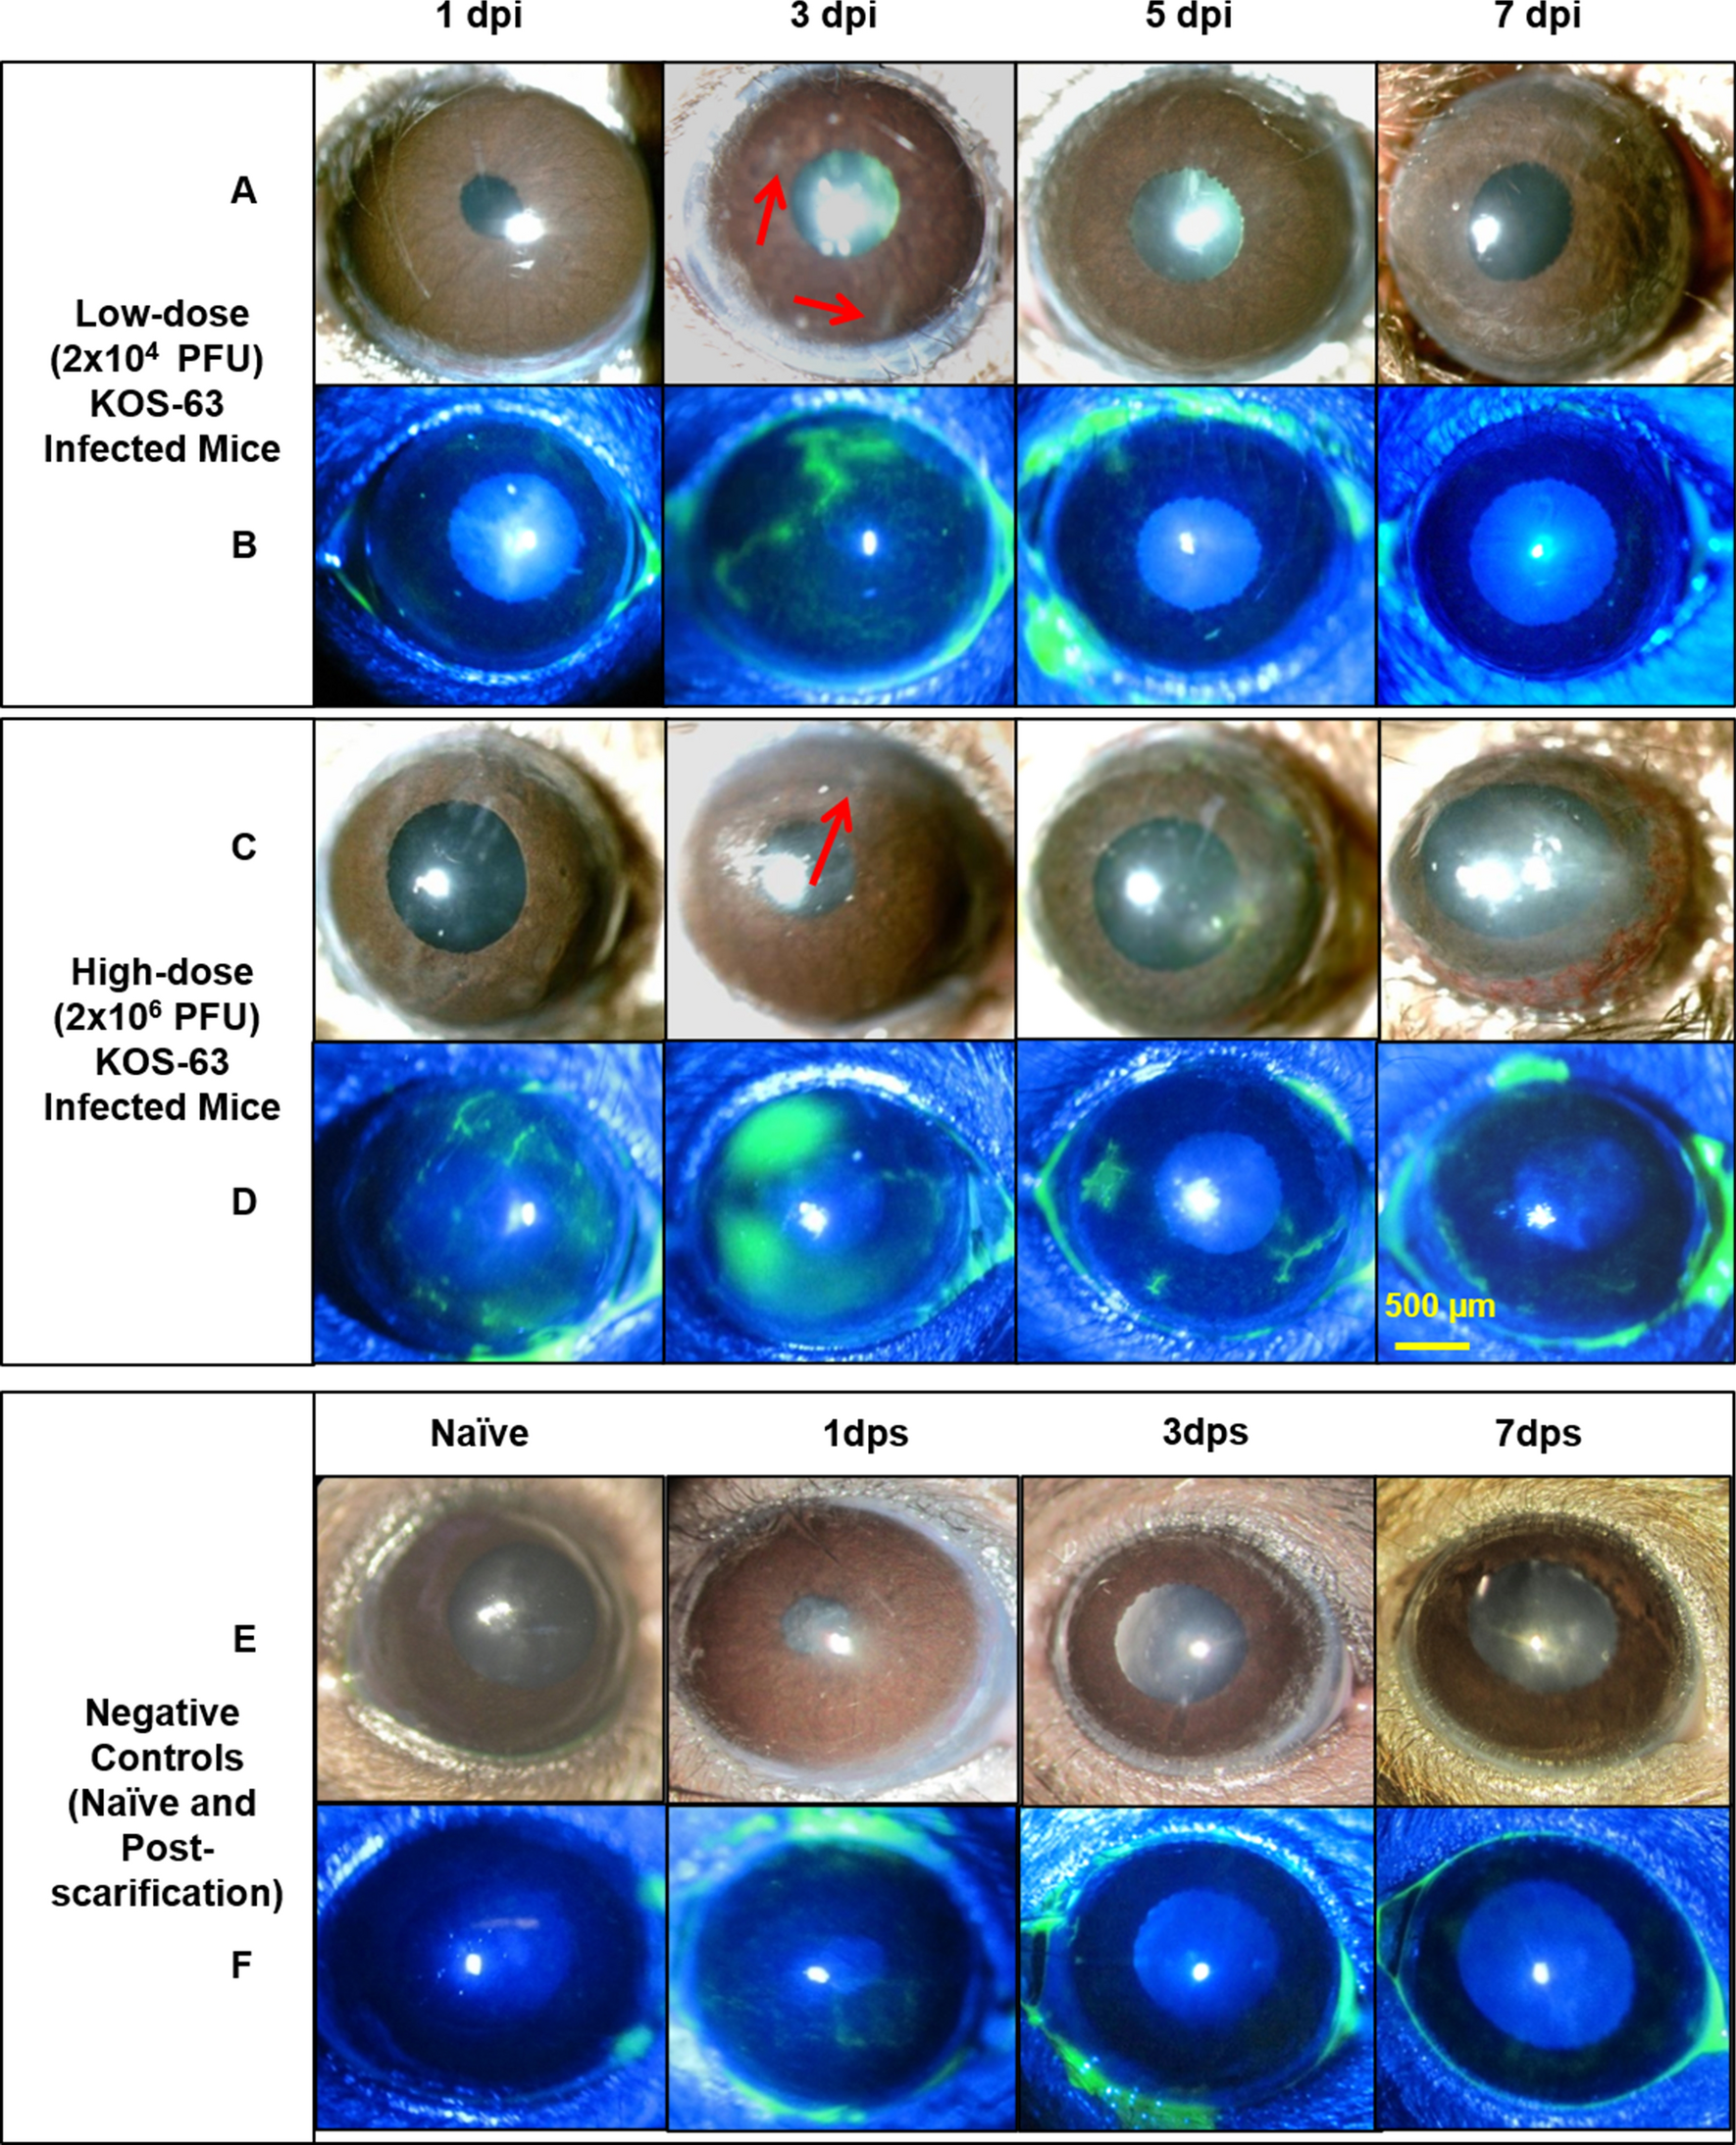 Herpes simplex virus-1 KOS-63 strain is virulent and causes titer-dependent  corneal nerve damage and keratitis | Scientific Reports